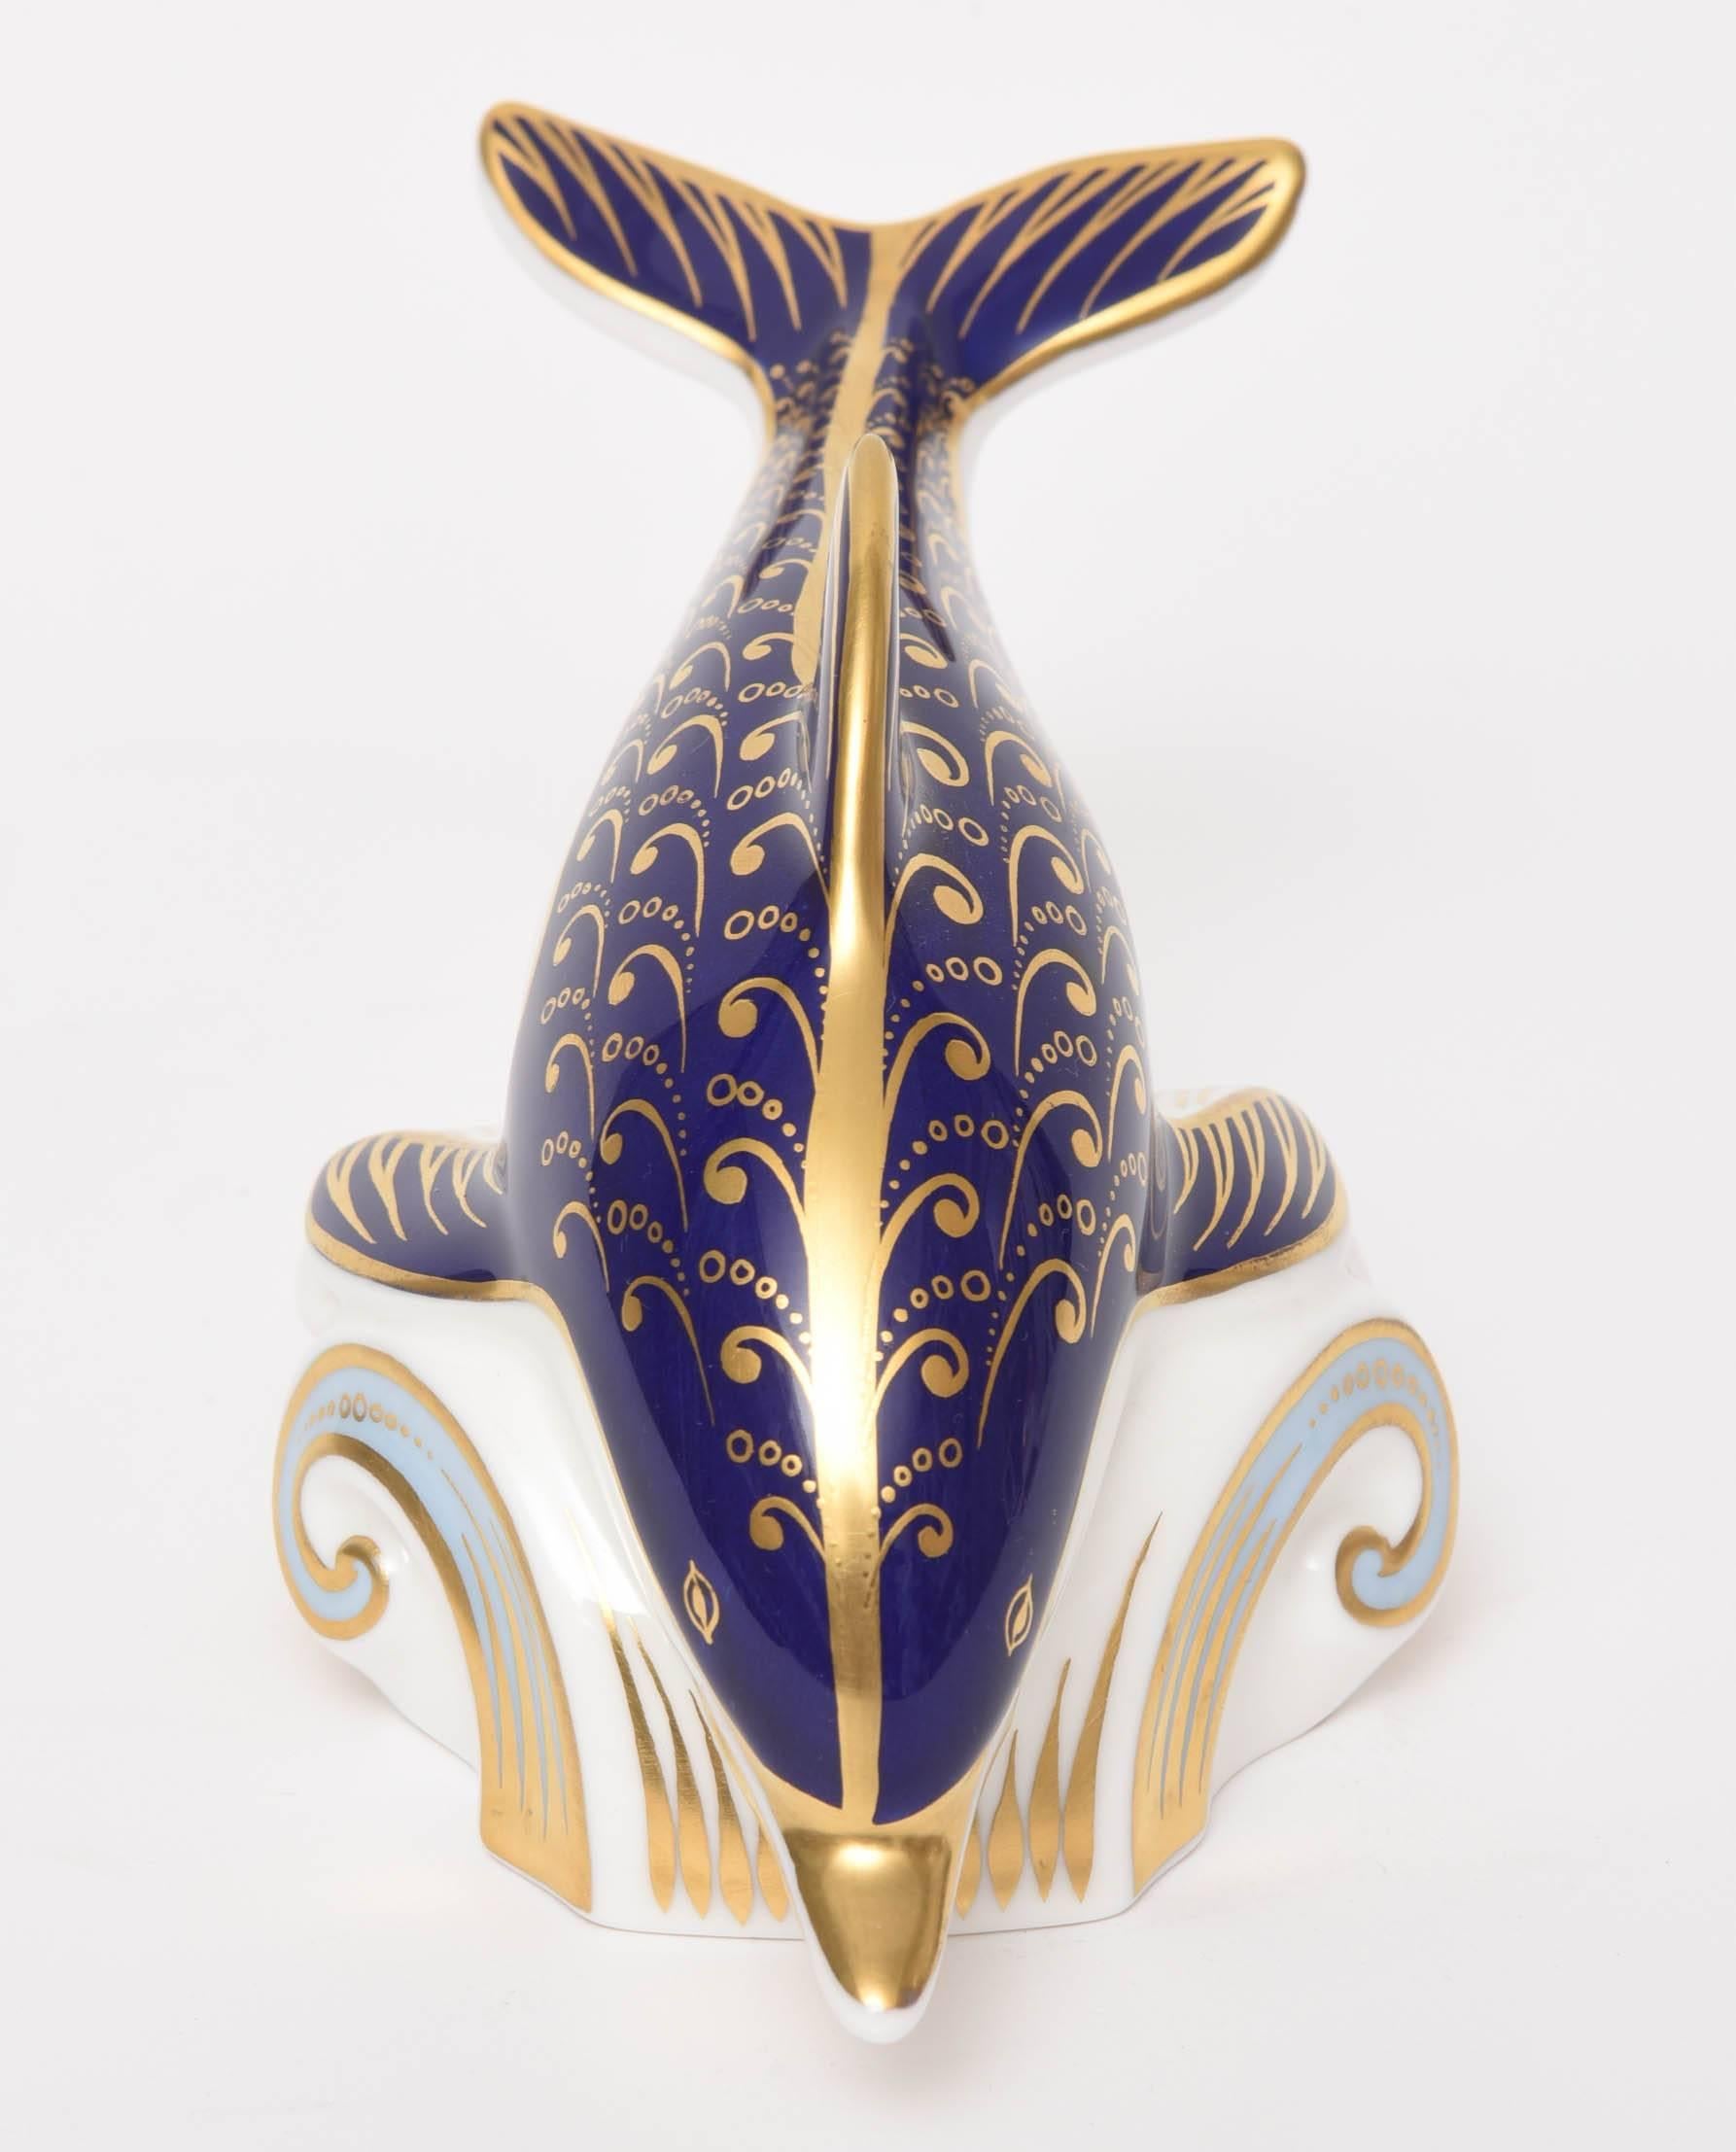 A whimsical and delightful dolphin shaped paperweight. Hand-painted double color blue and 24-karat gold. Such a treasure and measures just a little over 7.0